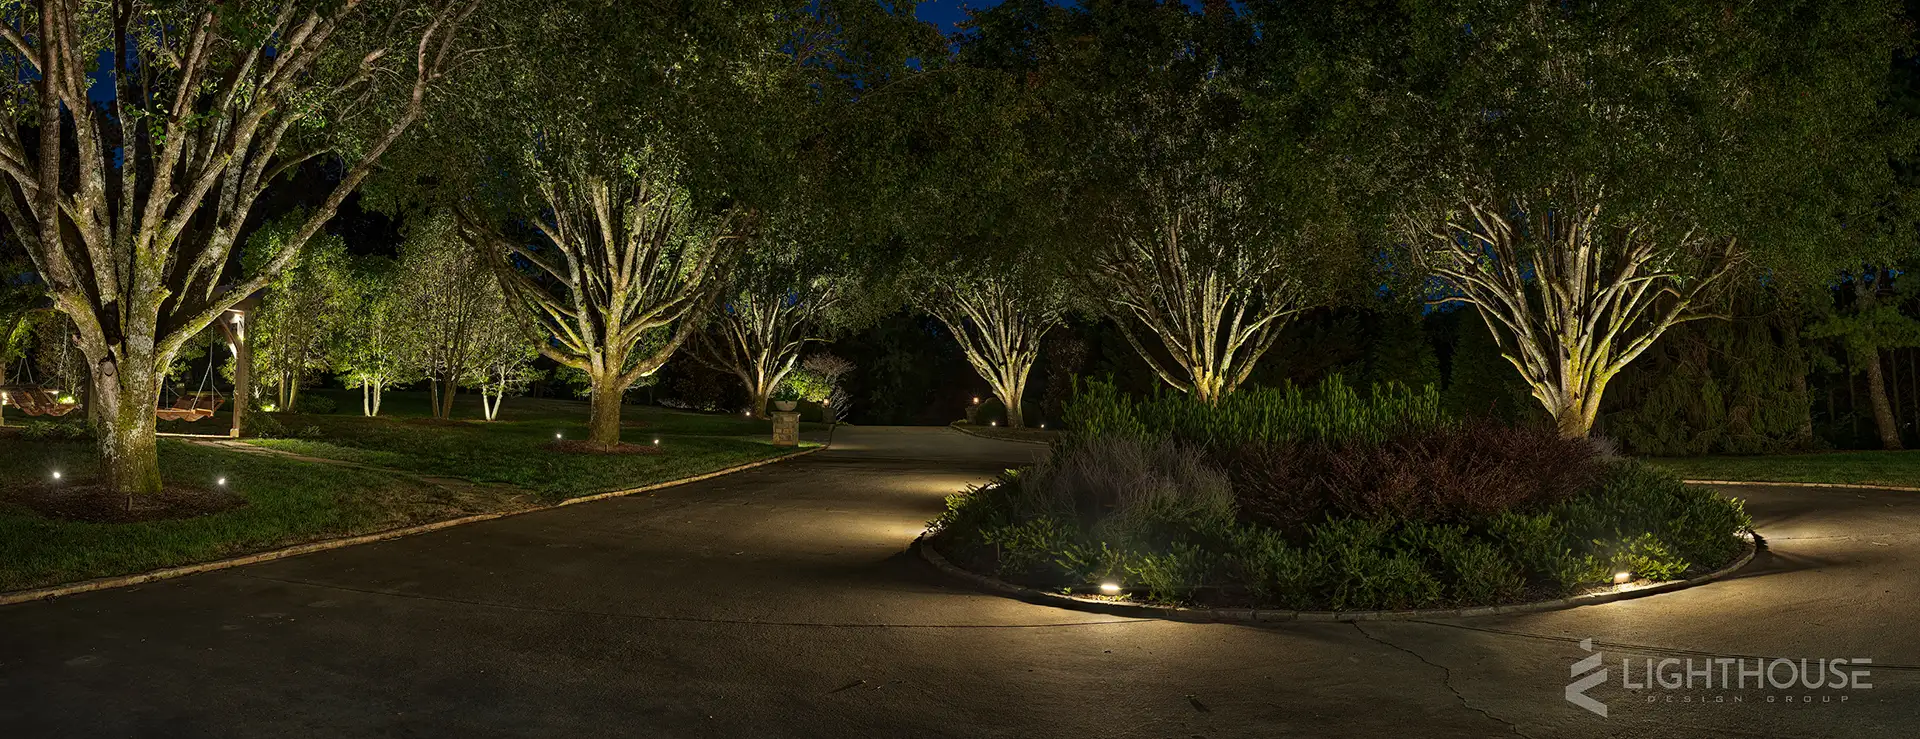 Killarney Rd image 1 driveway landscape Lighthouse Outdoor Lighting and Audio Knoxville TN